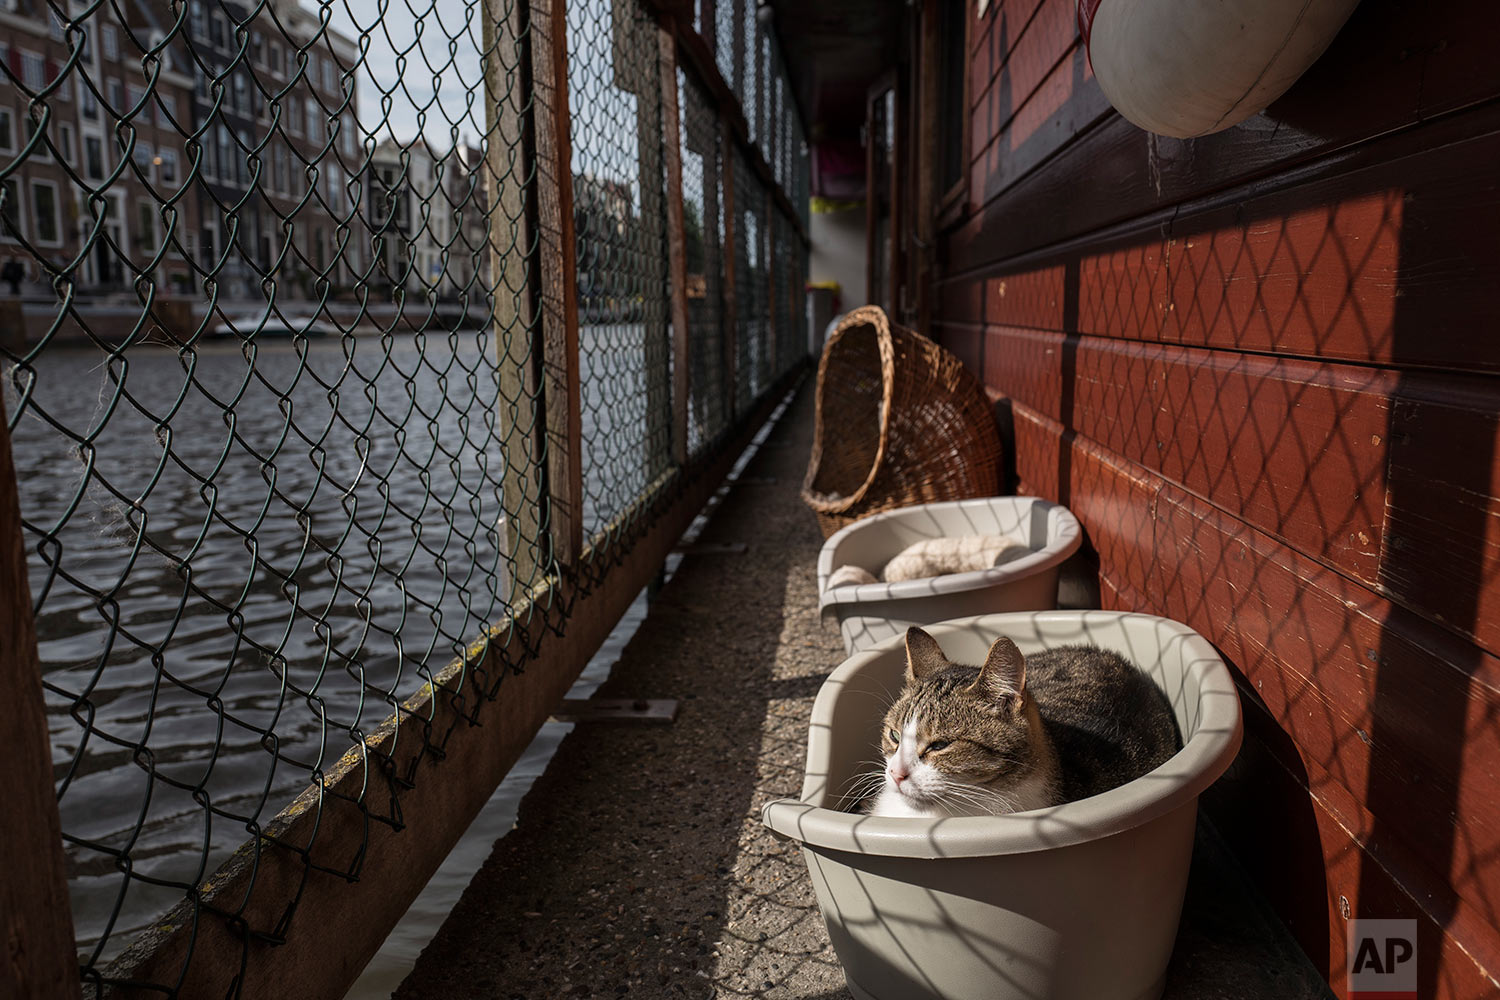  In this Wednesday, Aug. 2, 2017 photo, Borre, an 8-year-old cat sits in a basket next to the canal on the Catboat shelter in Amsterdam, Netherlands. (AP Photo/Muhammed Muheisen) 